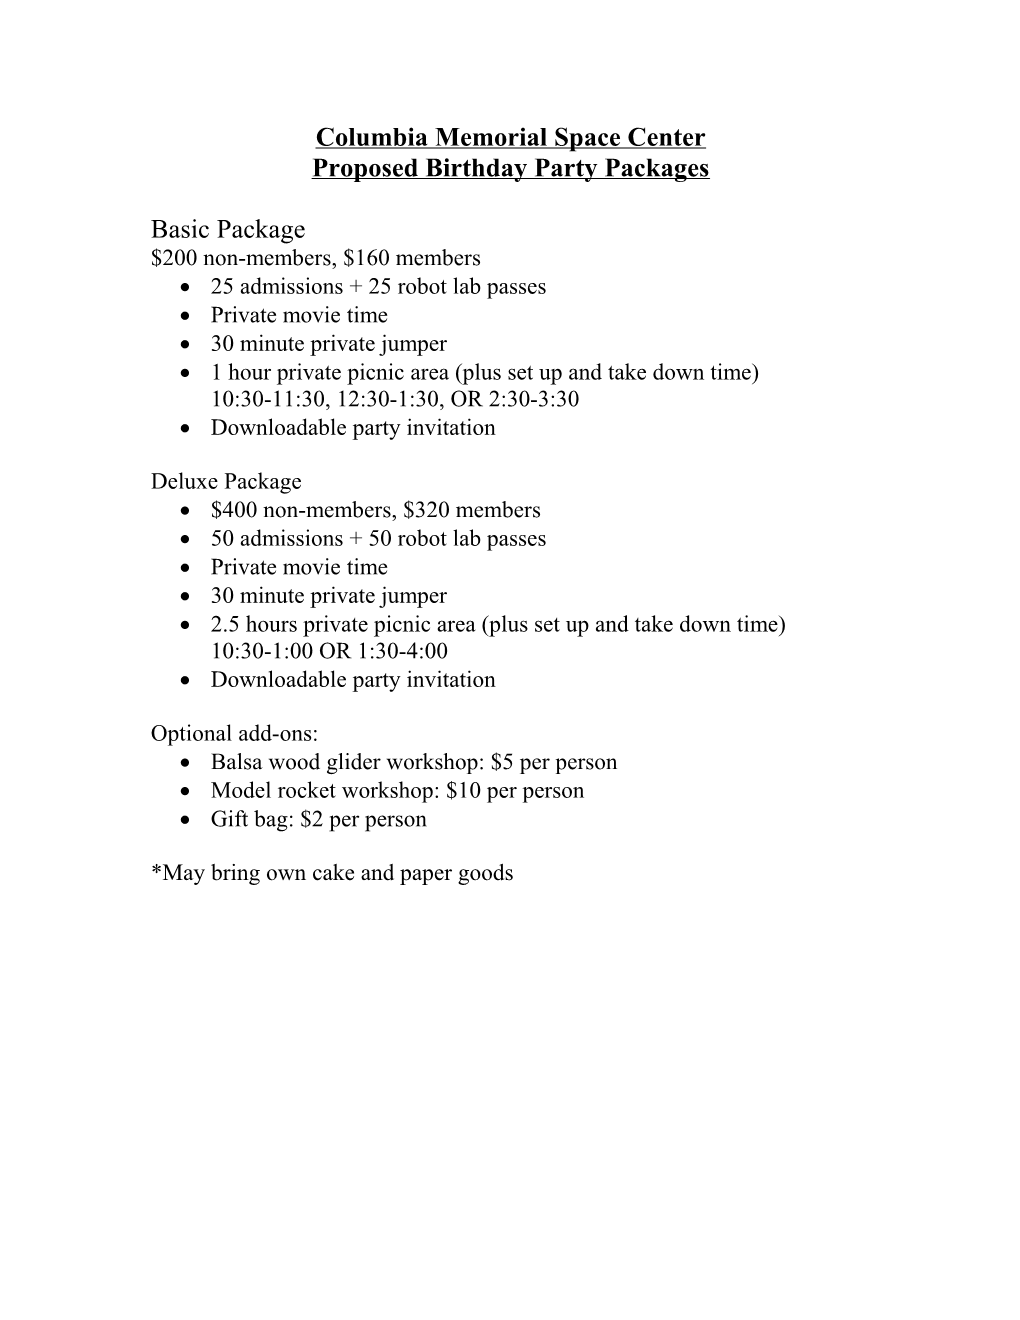 Proposed Birthday Party Packages